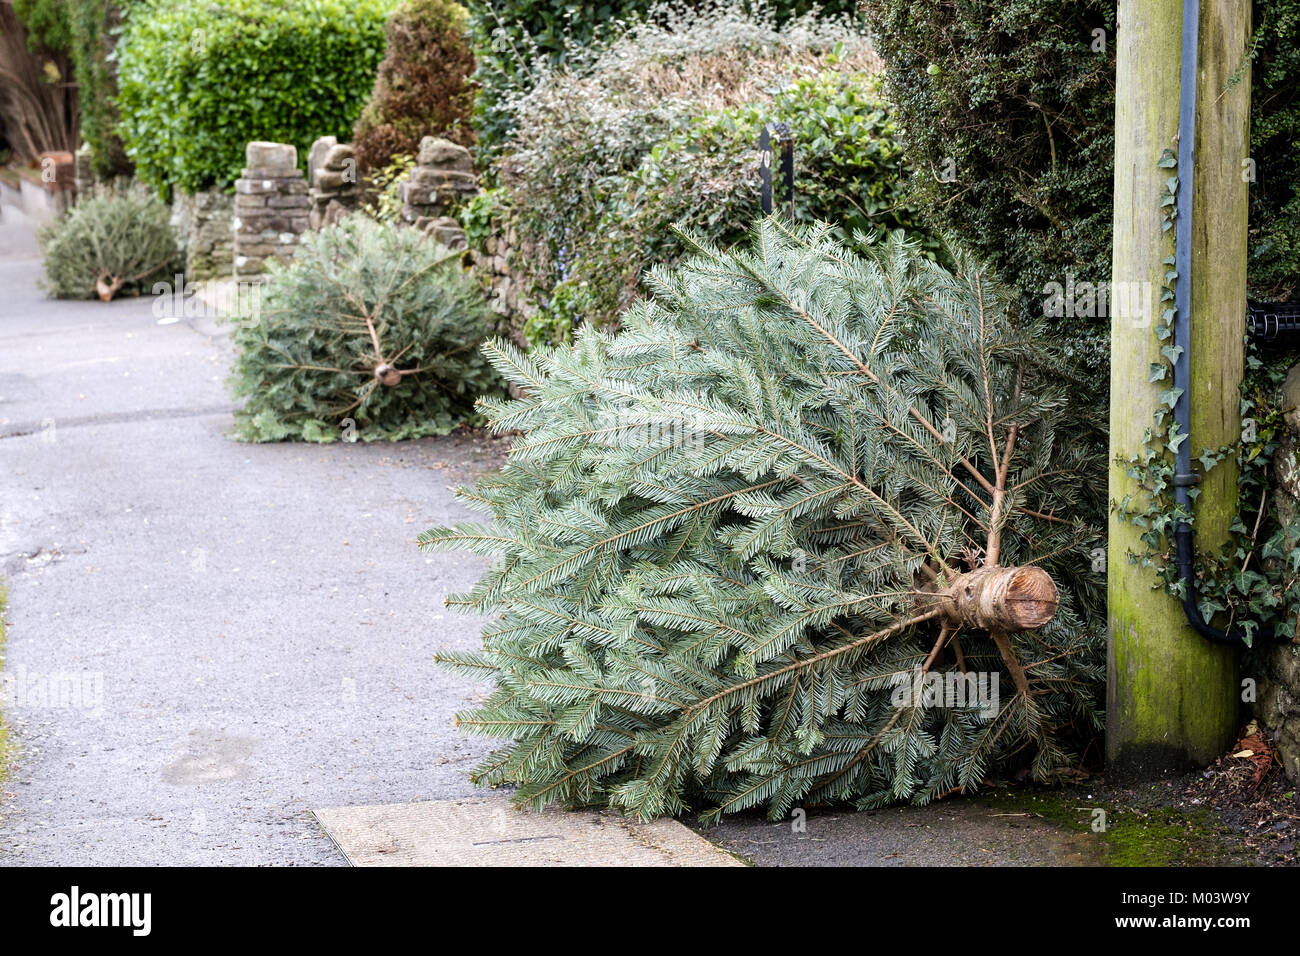 Bristol UK, Thurs 18th Jan 2018. Christmas is well and truly over as a row of household Christmas Trees line the road on the first, Local Authority, ‘Green' refuse collection day of the New Year. Credit: Stephen Hyde/Alamy Live News Stock Photo